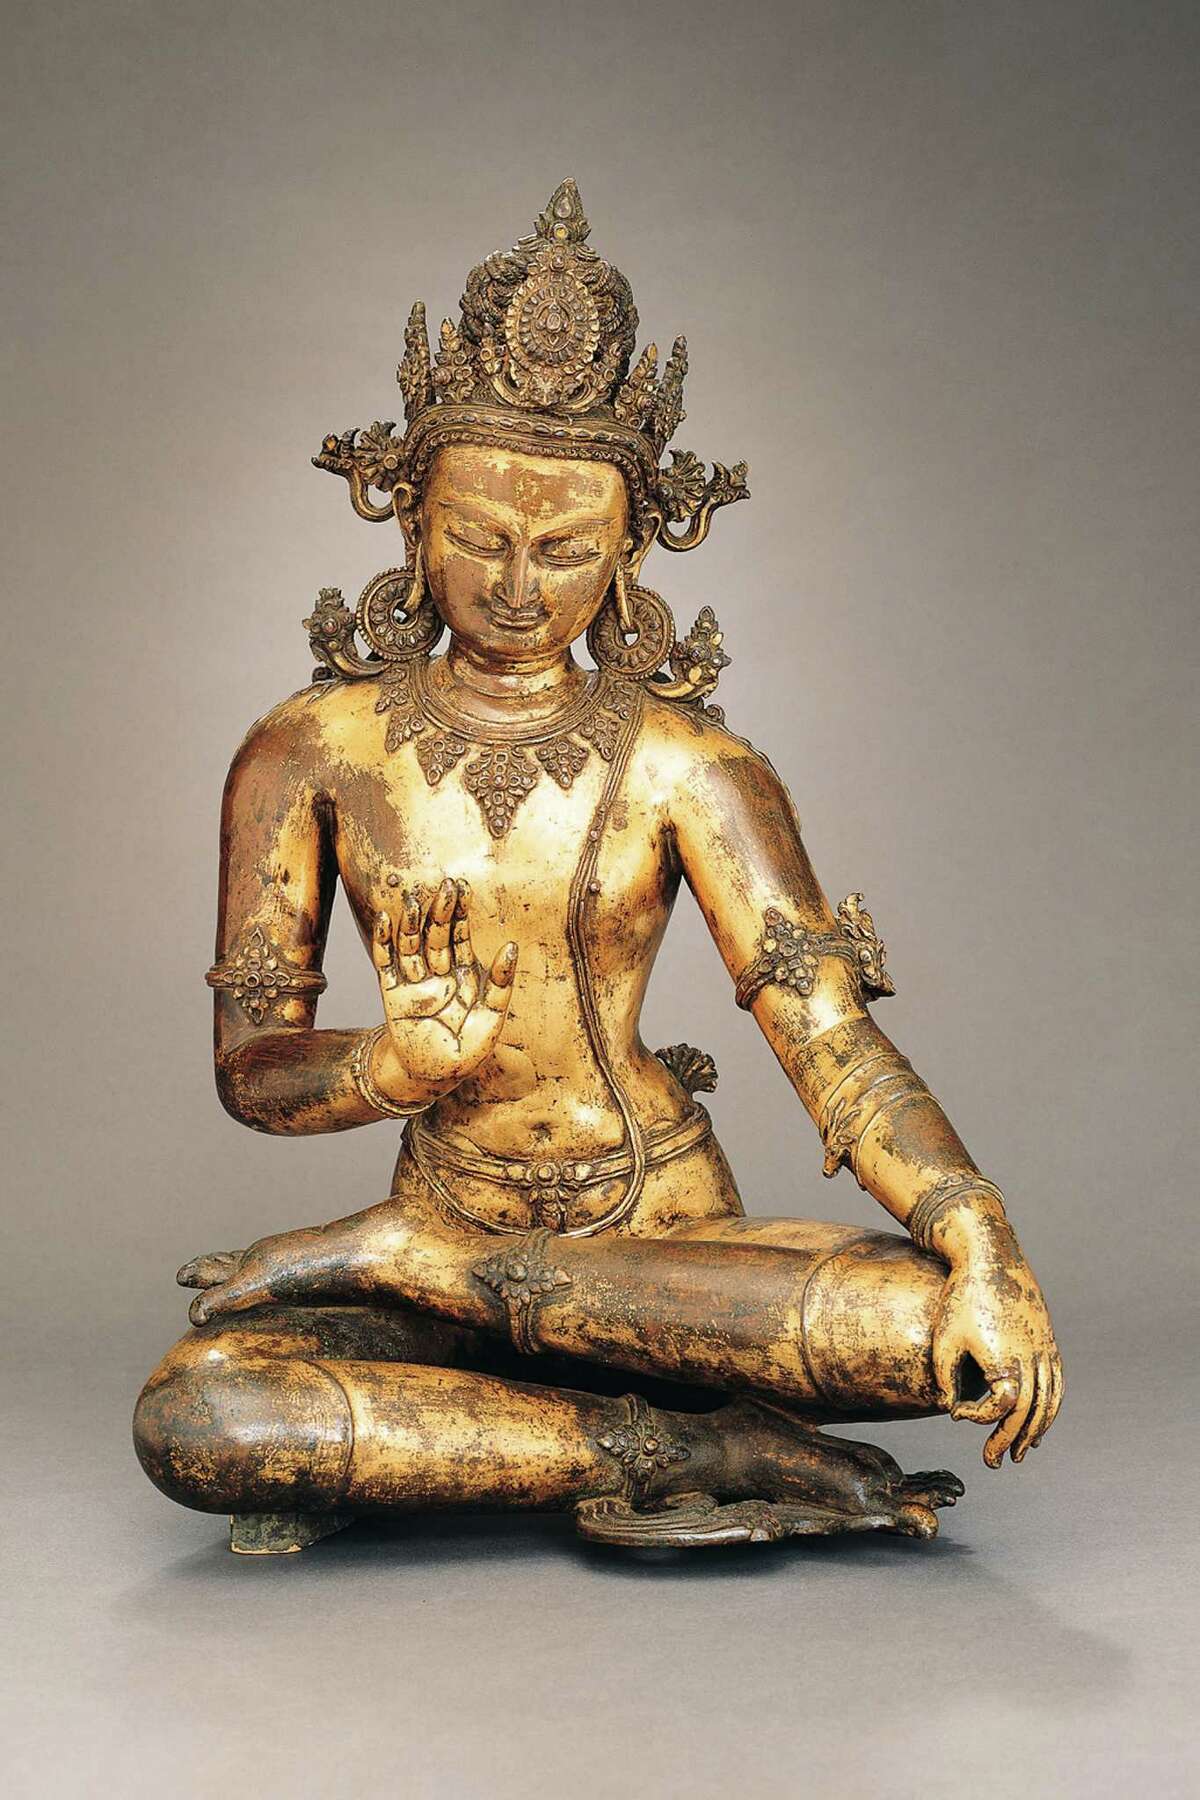 Seated Bothisattva, a 13th century Nepalese sculpture in gilt copper with semiprecious stone inlays, is among the treasures on display at the Asia Society Texas Center exhibit "Treasures of Asian Art: A Rockefeller Legacy".